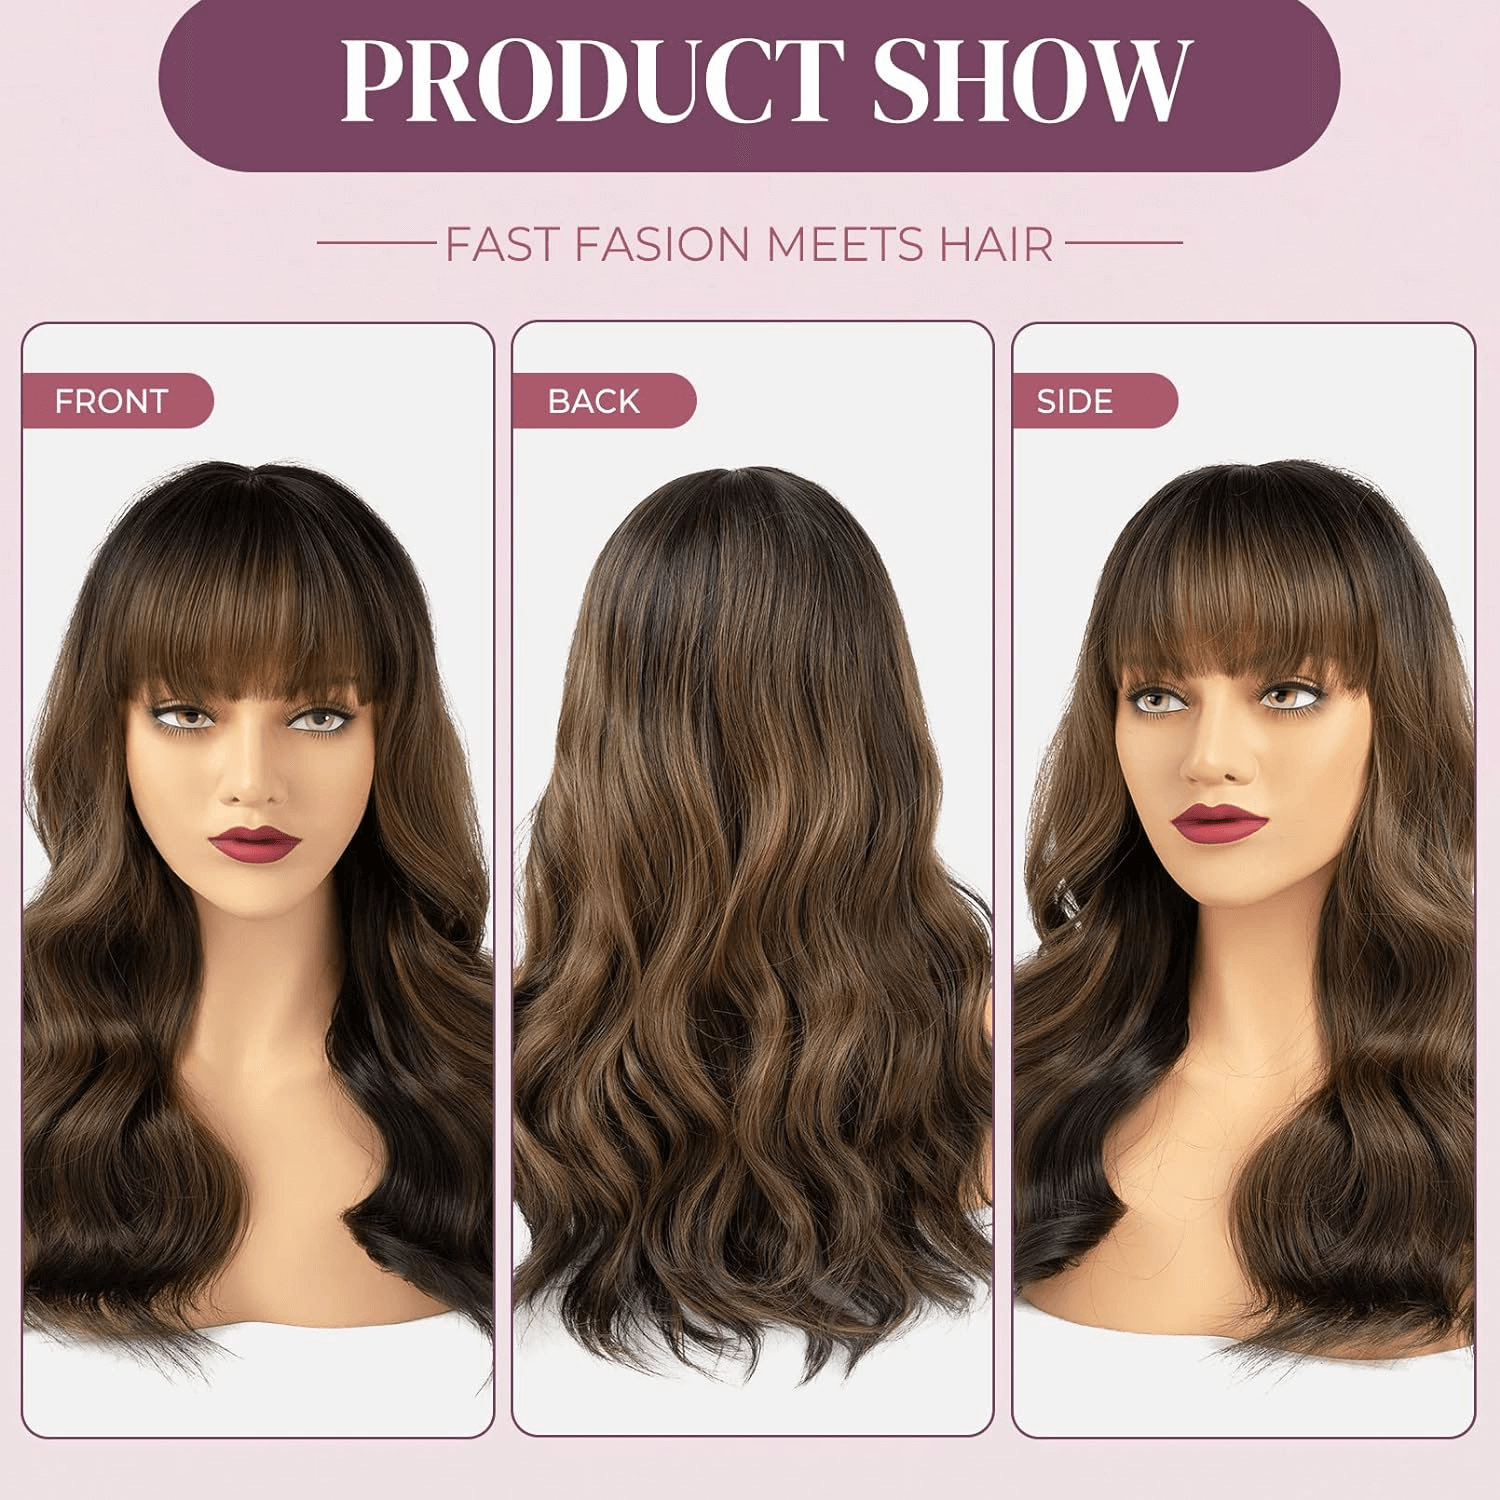 Long Wavy Blonde Wig with Curtain Bangs for Women, Dark Brown Mixed Caramel Brown Synthetic Hair Piece for Daily Use Party